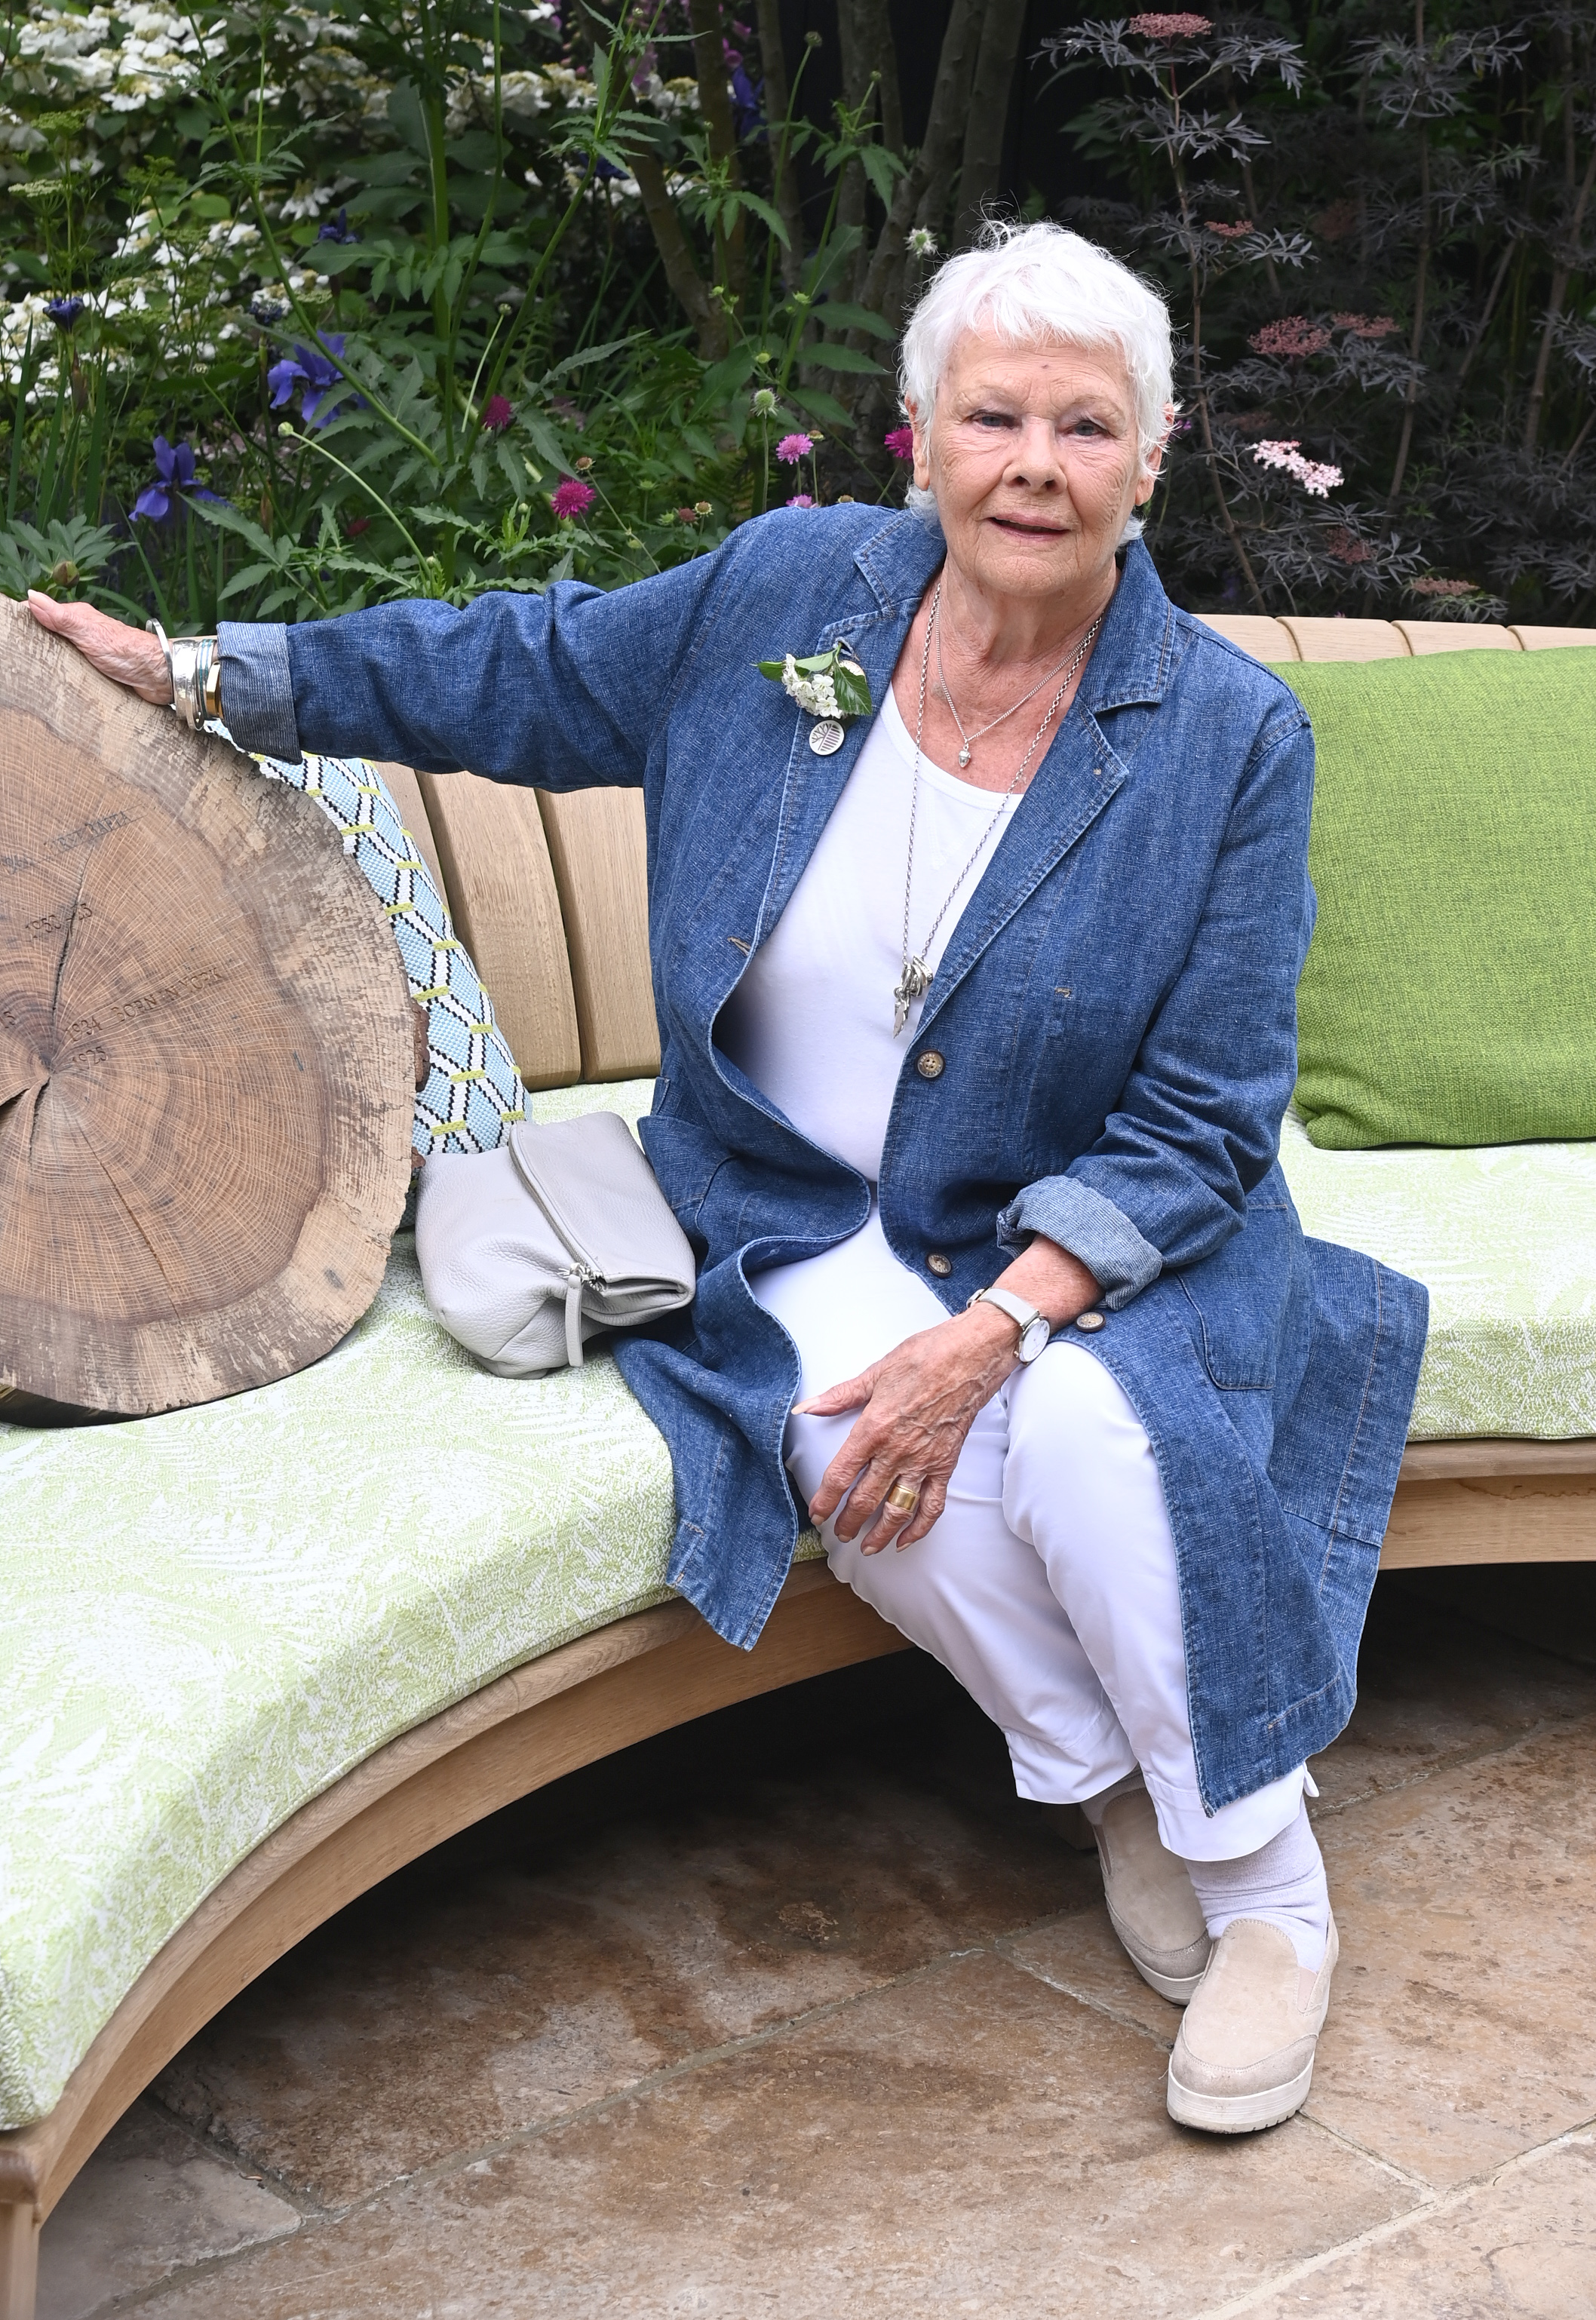 Dame Judy Dench attends press day at the RHS Chelsea Flower Show at The Royal Hospital Chelsea in London, England, on May 23, 2022. | Source: Getty Images